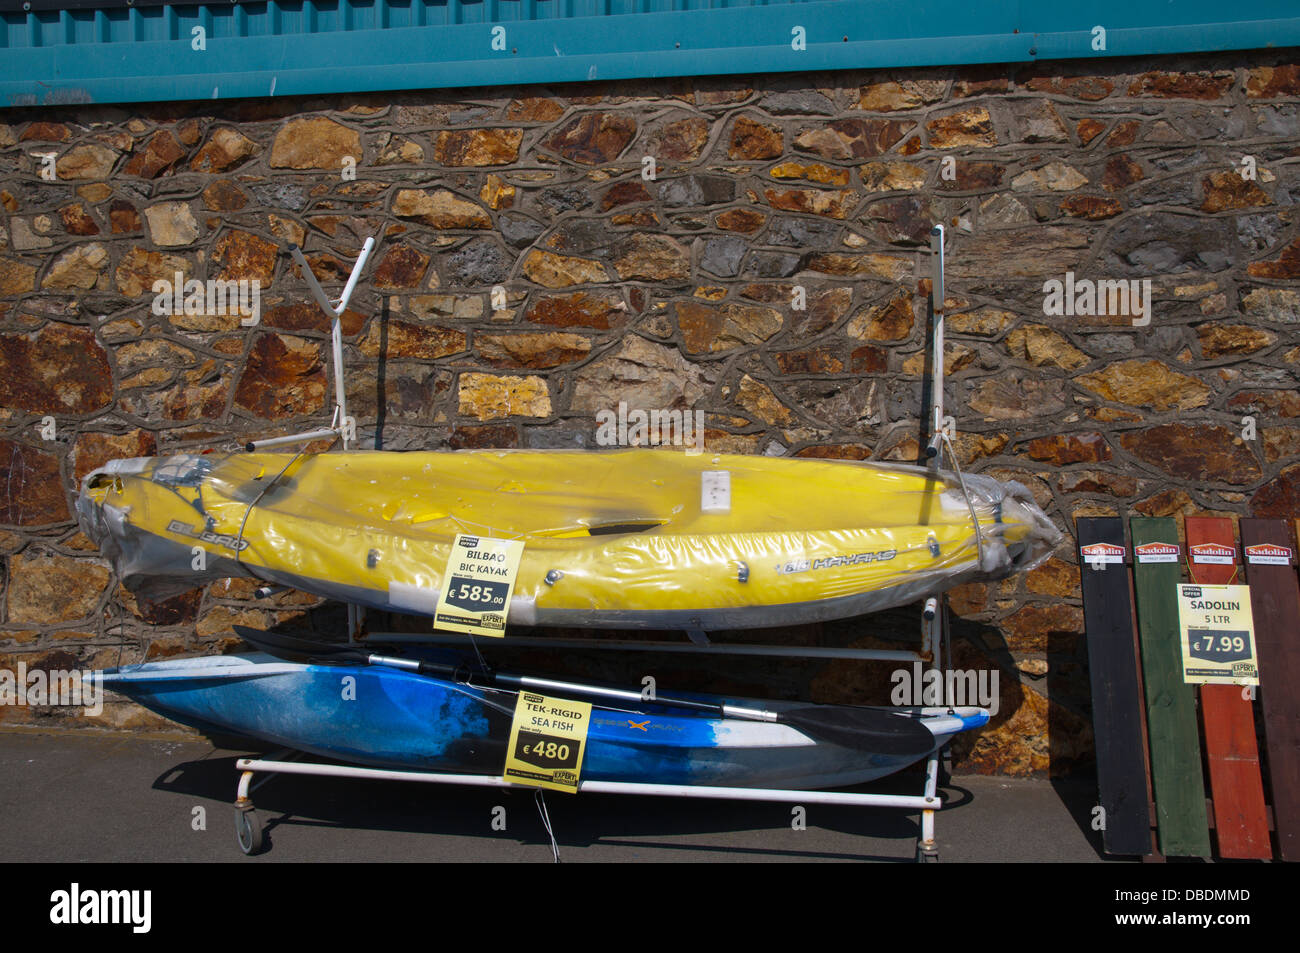 Kayaks and other water sports equipment for sale Howth peninsula near Dublin Ireland Europe Stock Photo